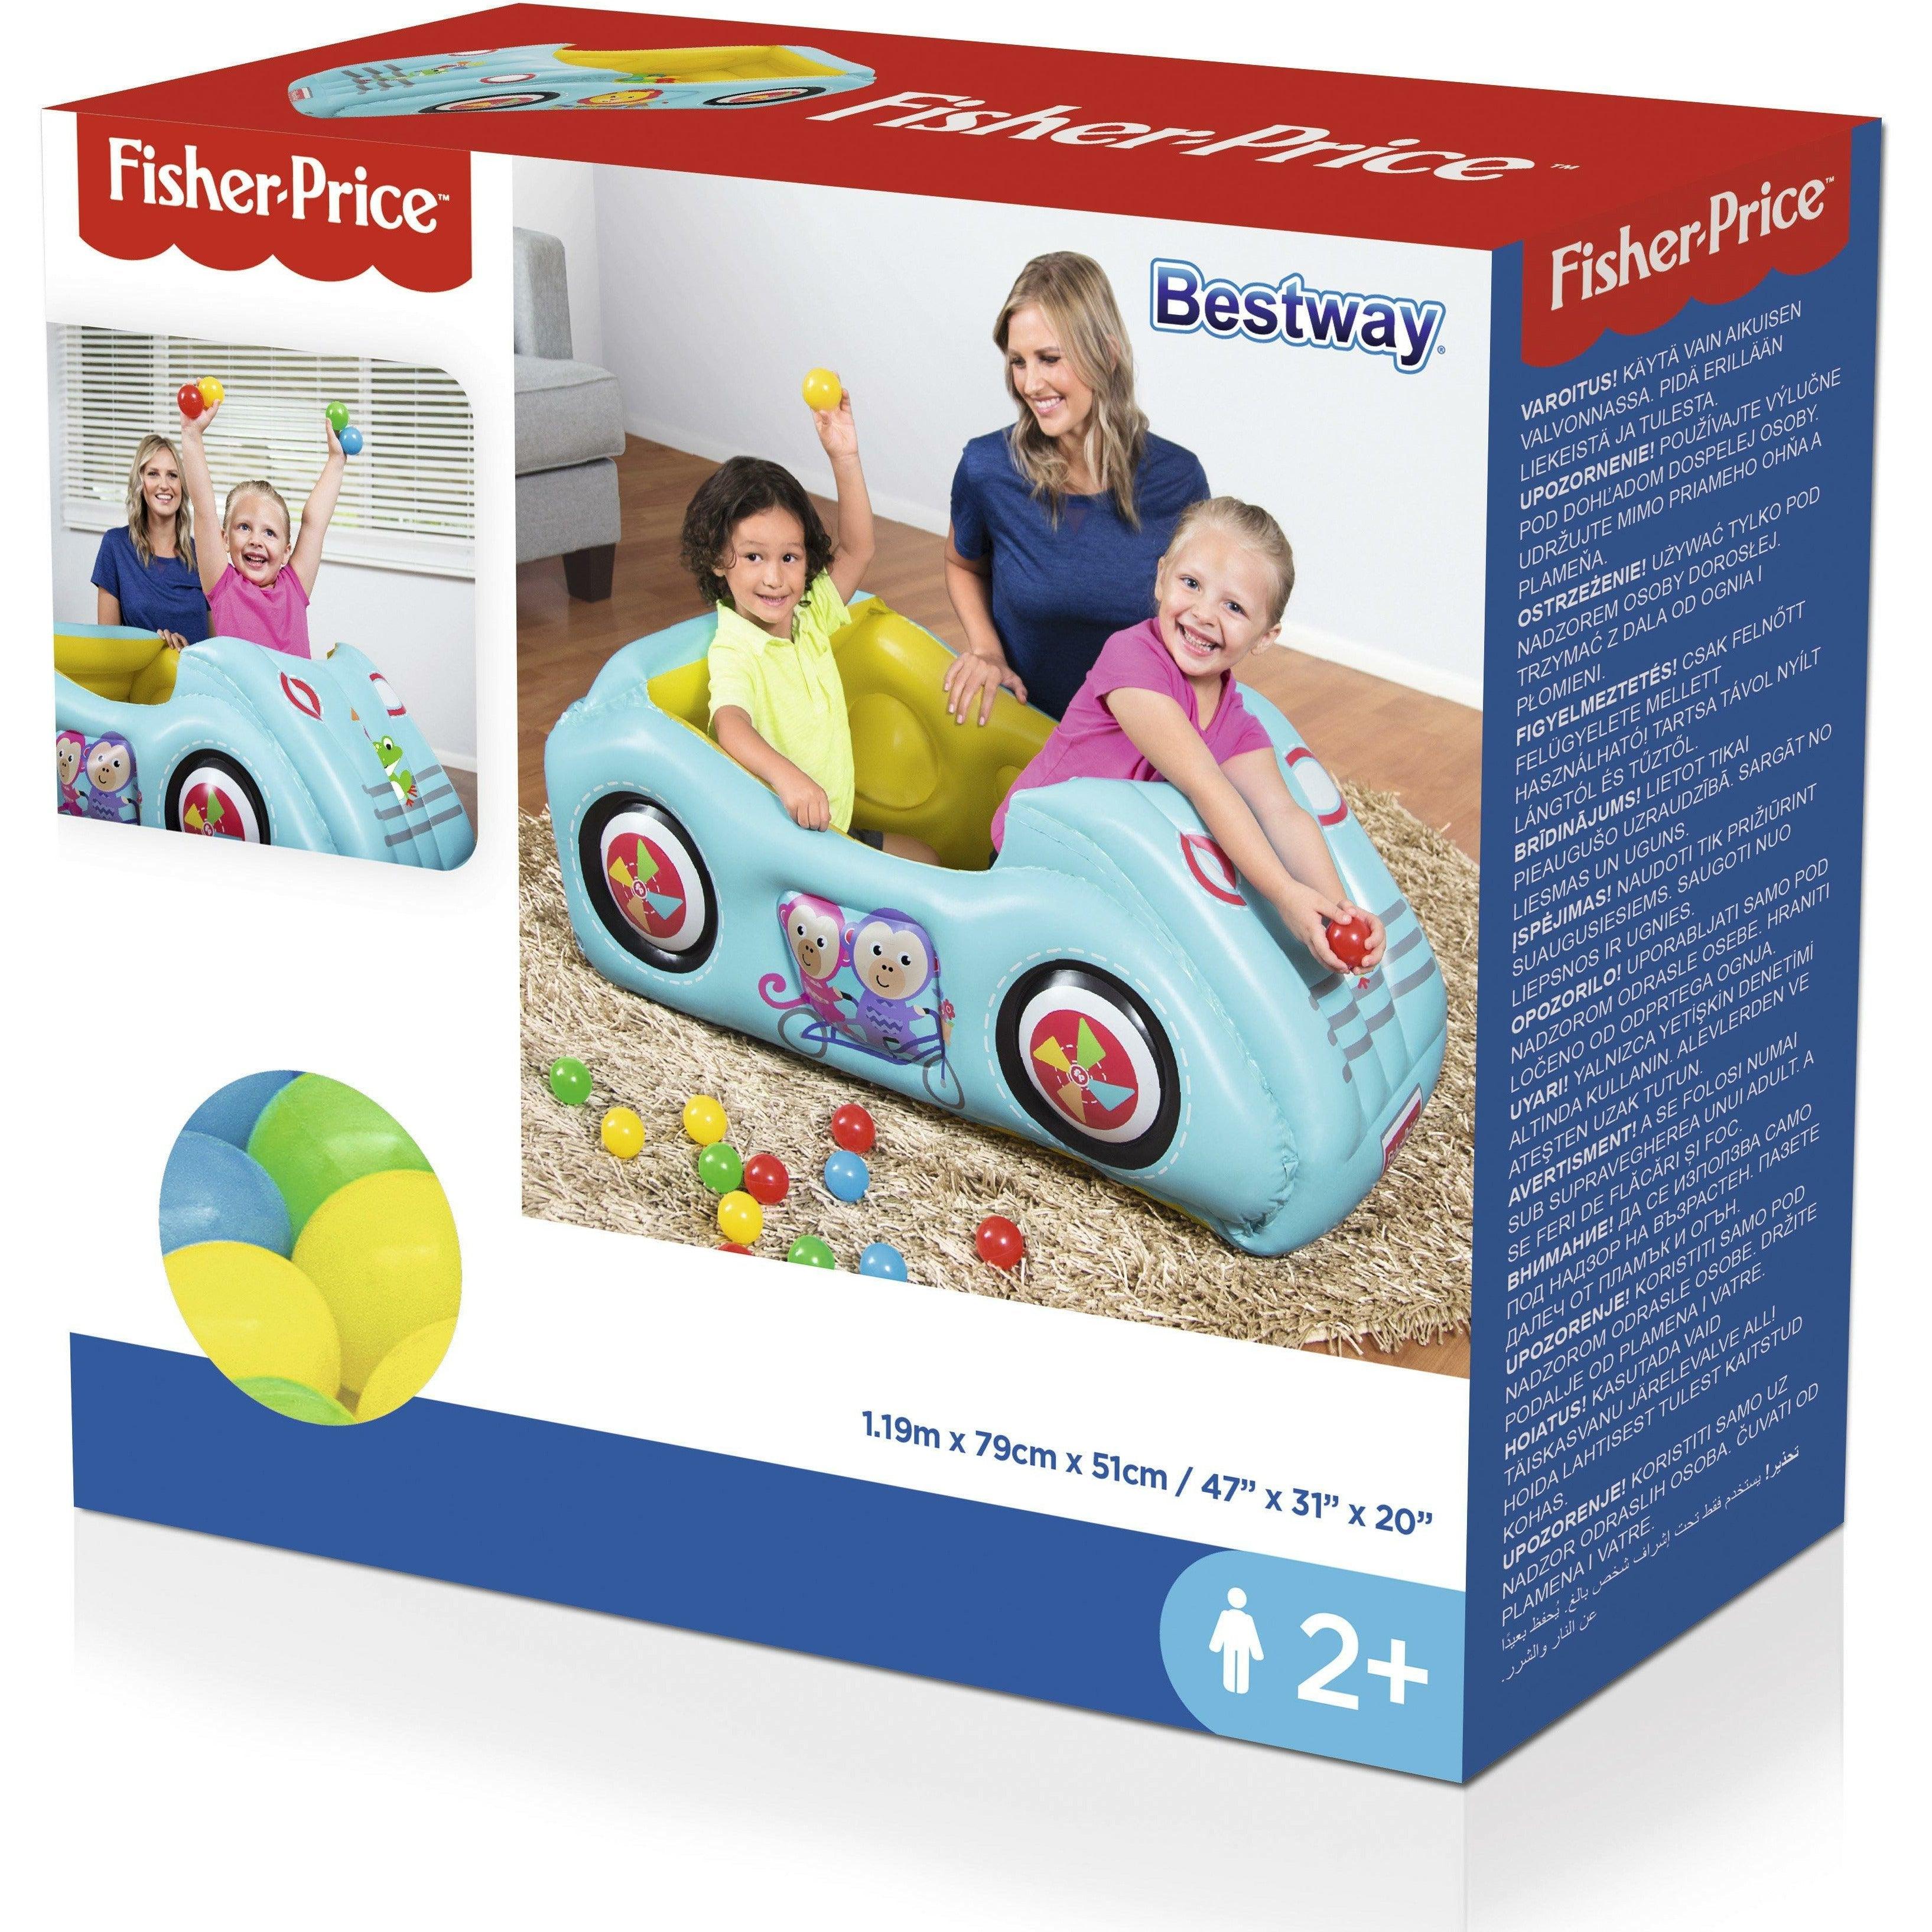 Bestway 93535 Fisher-Price Racing Car Shaped Inflatable Ball Pit For Kids - BumbleToys - 8-13 Years, Boys, Girls, Sand Toys Pools & Inflatables, Toy House